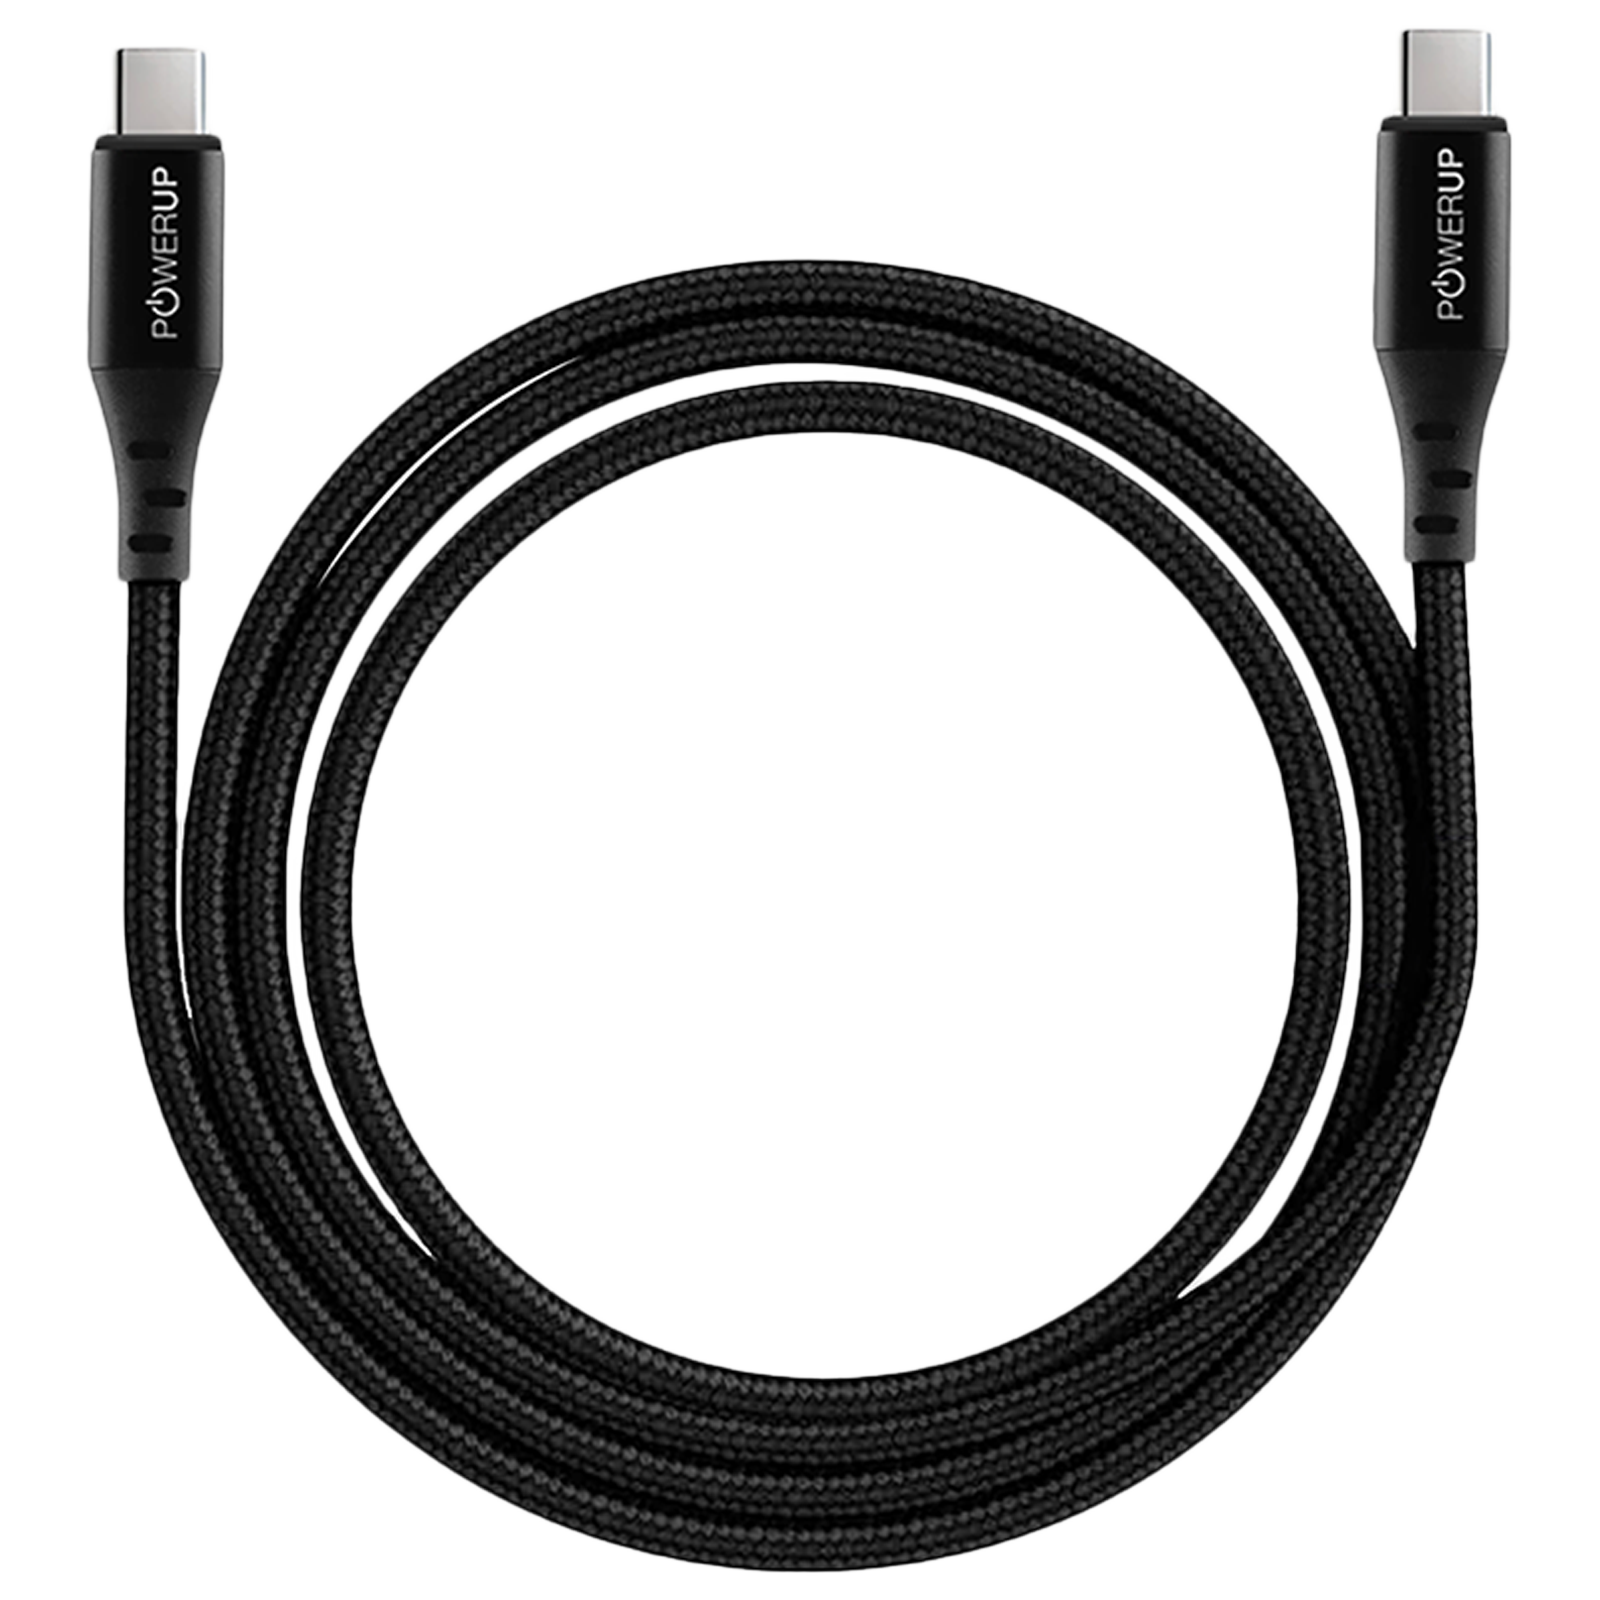 Powerup 2 Meter USB 2.0 (Type C) to USB 2.0 (Type C) Power/Charging USB Cable (PUP-CCNL100-20BK, Black)_1